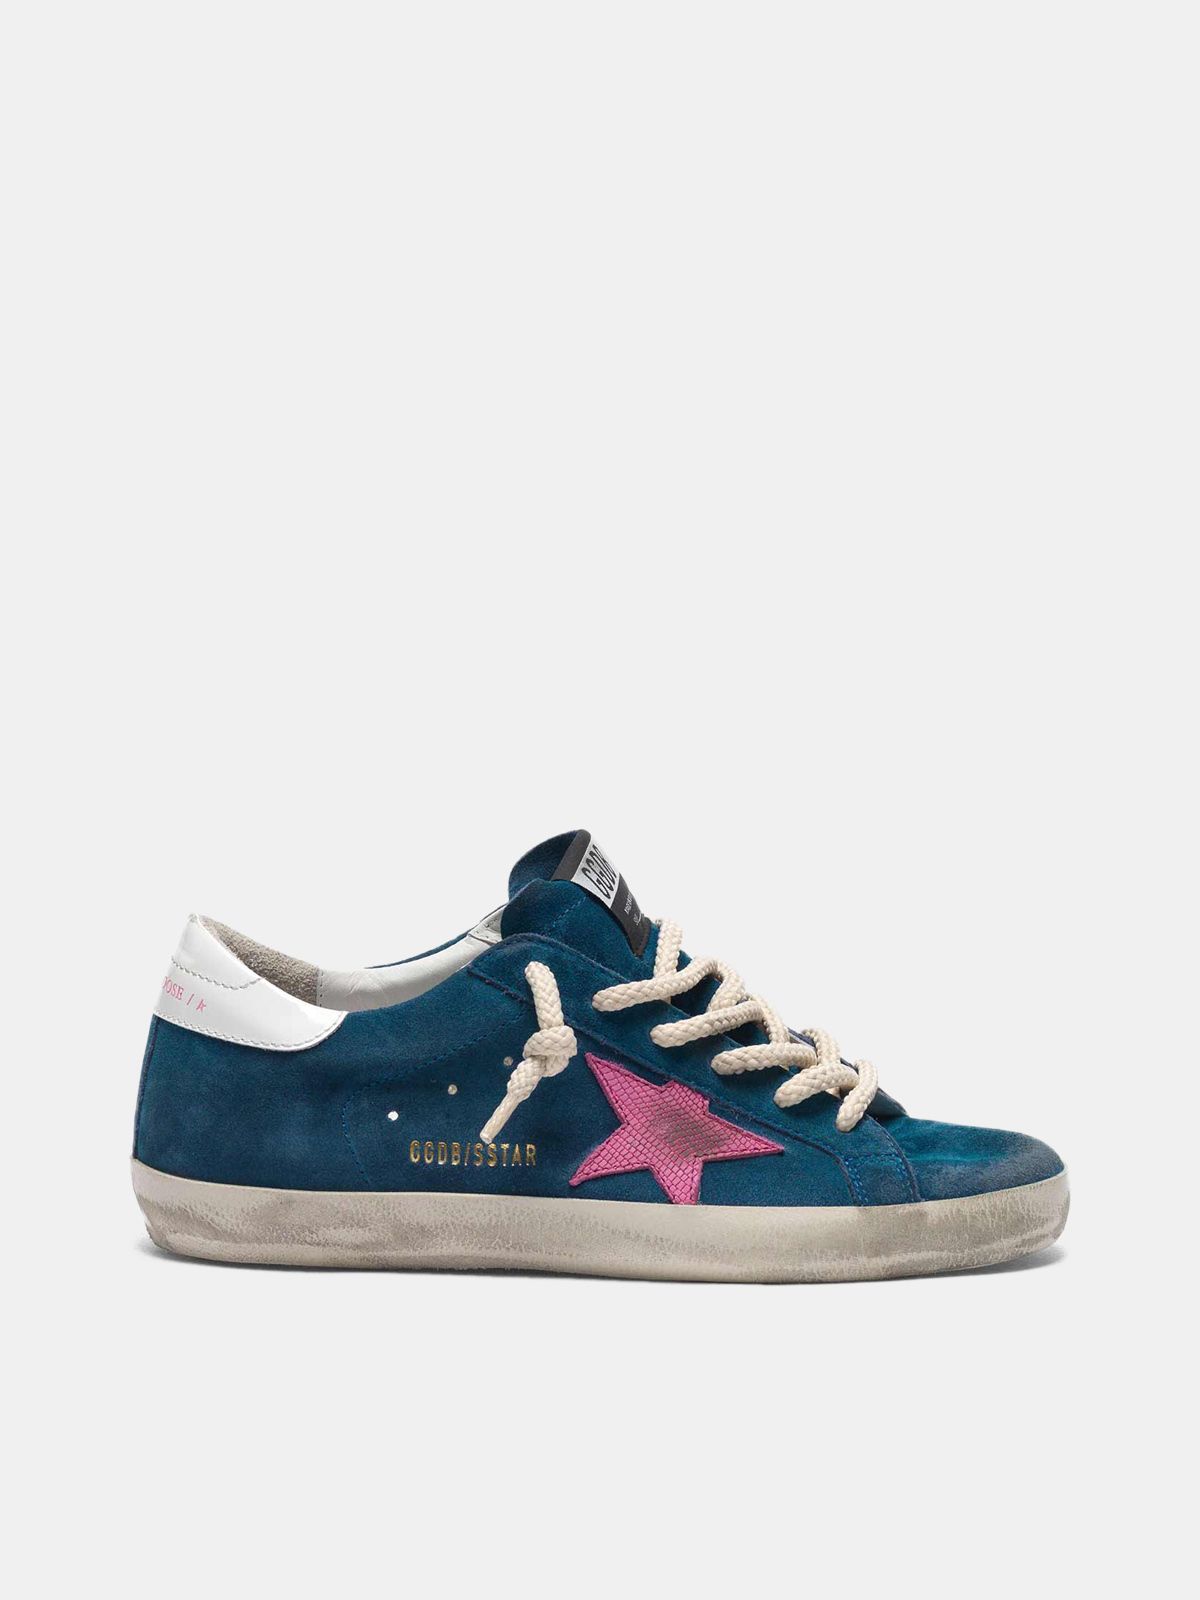 blue suede with a pink star | Golden Goose